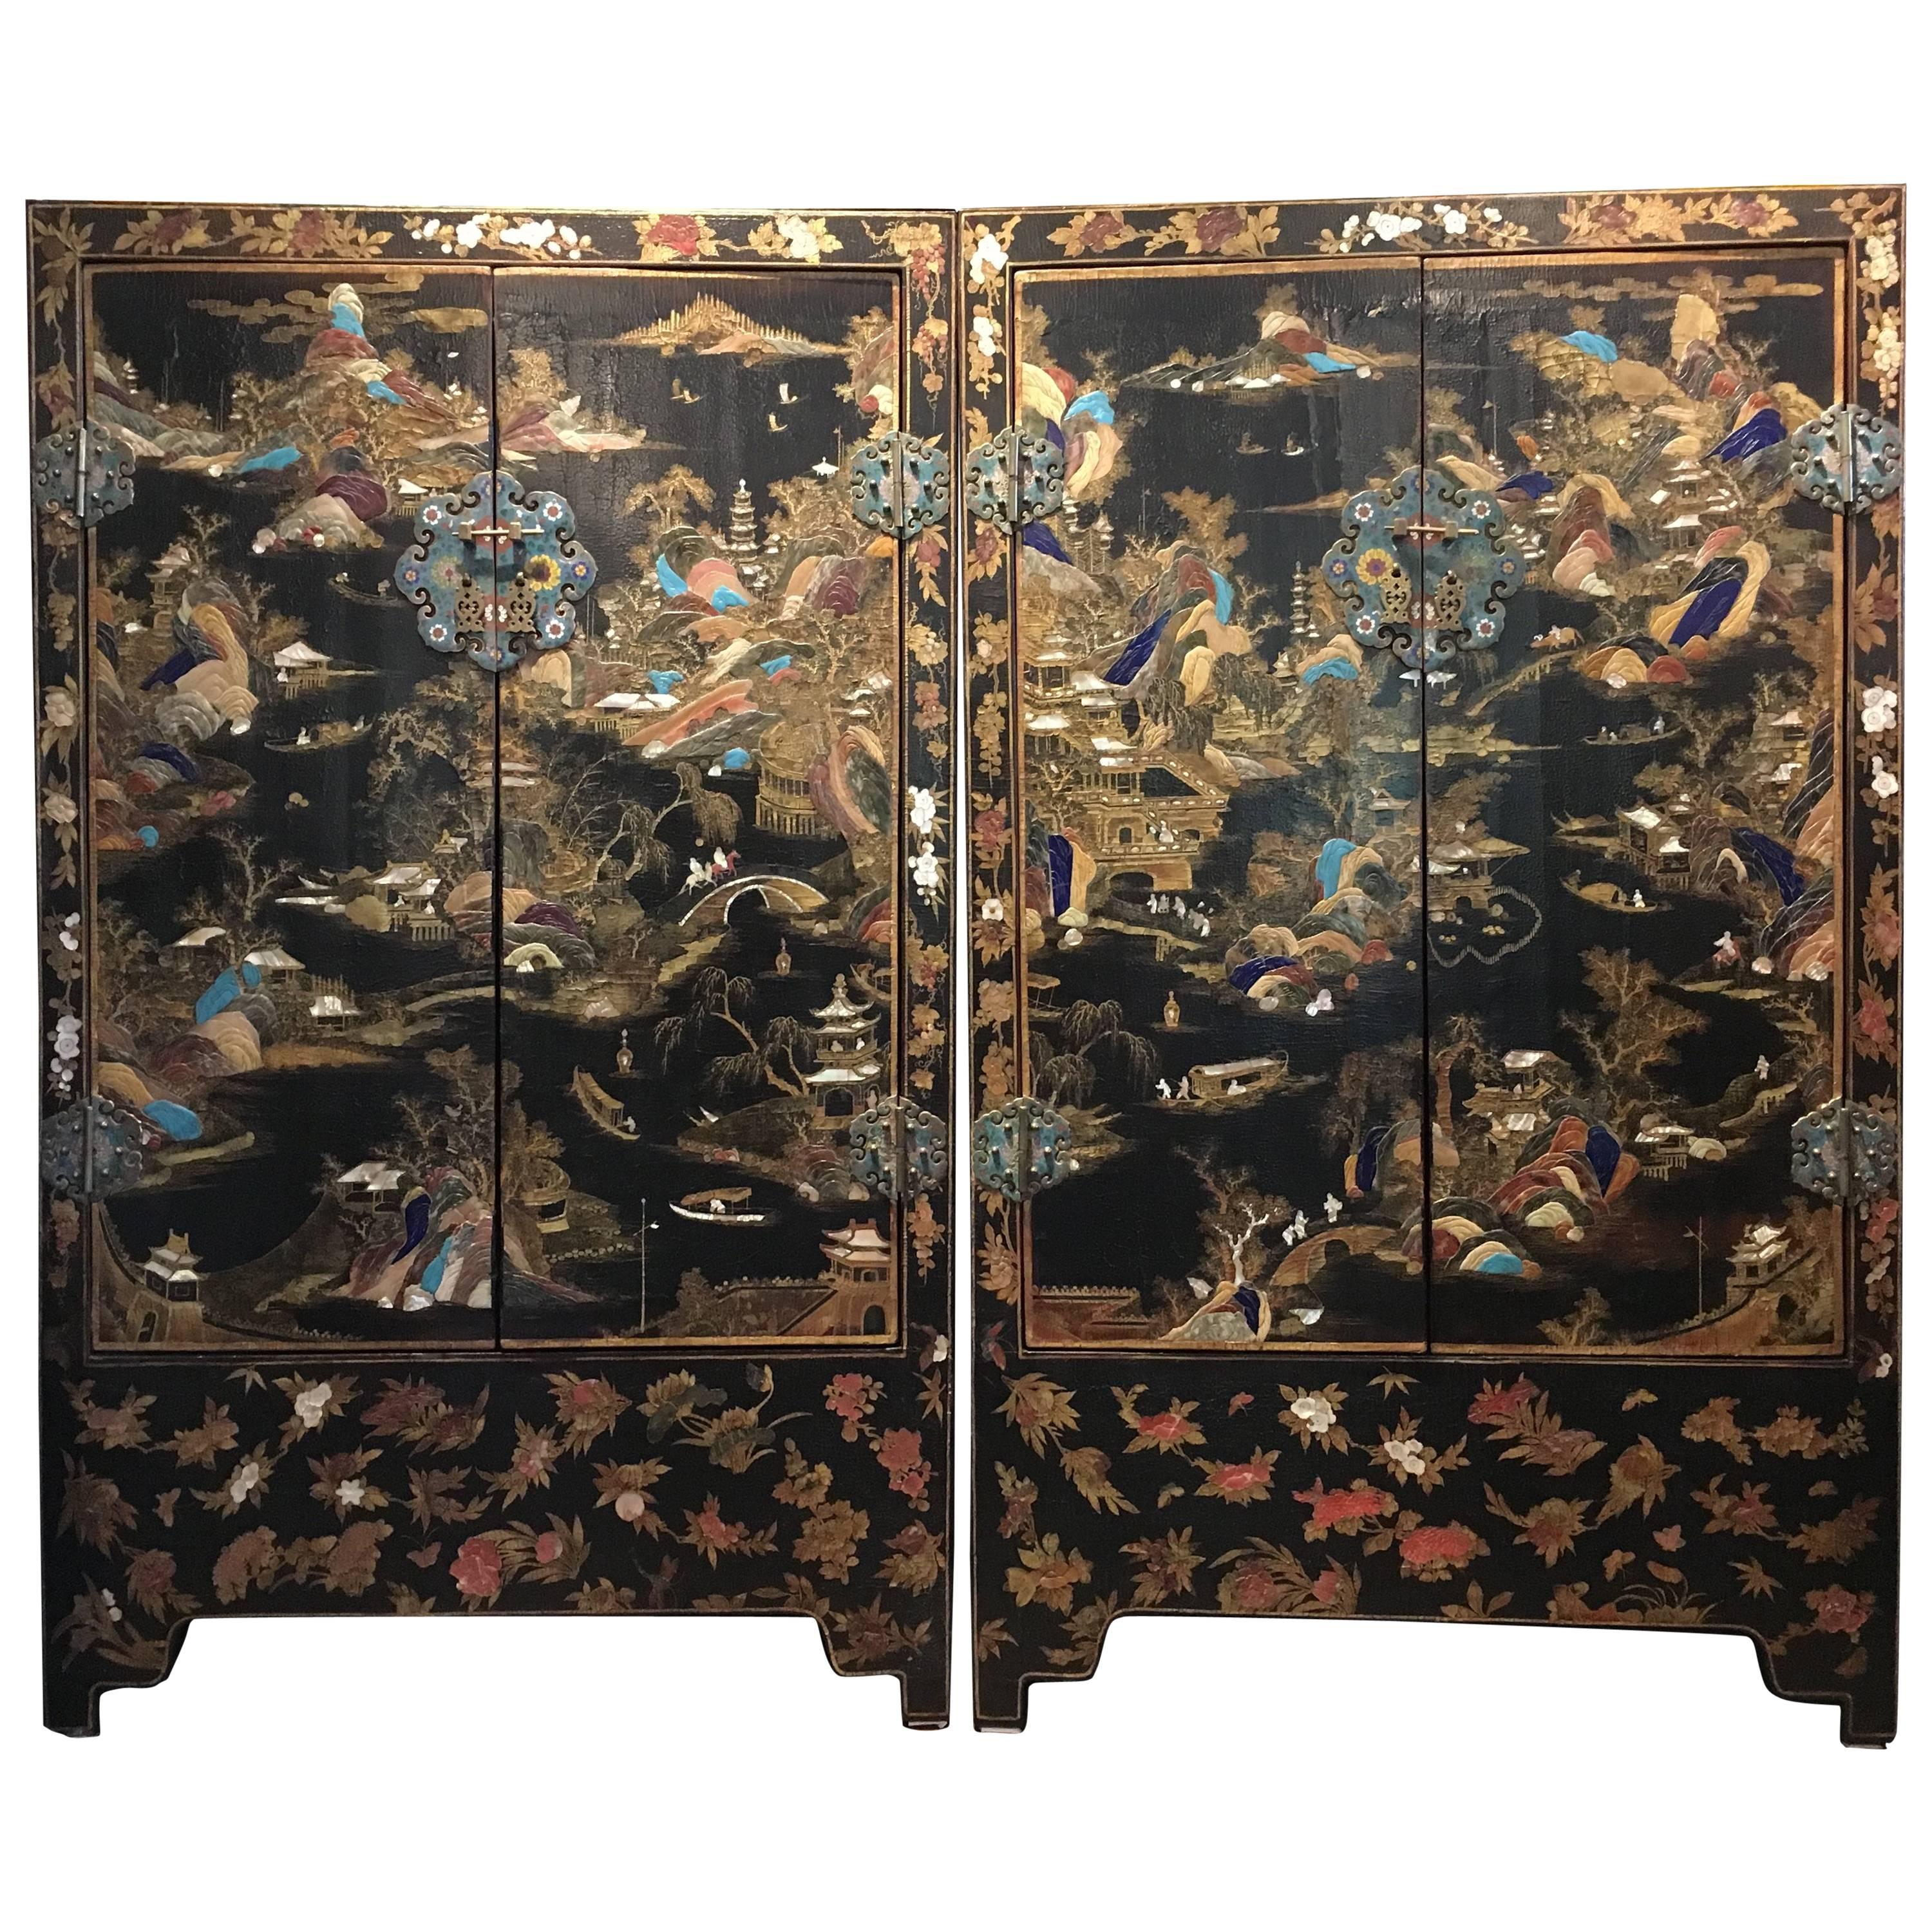 Pair of Chinese Qing Dynasty Lacquer Painted and Hardstone Inlaid Cabinets